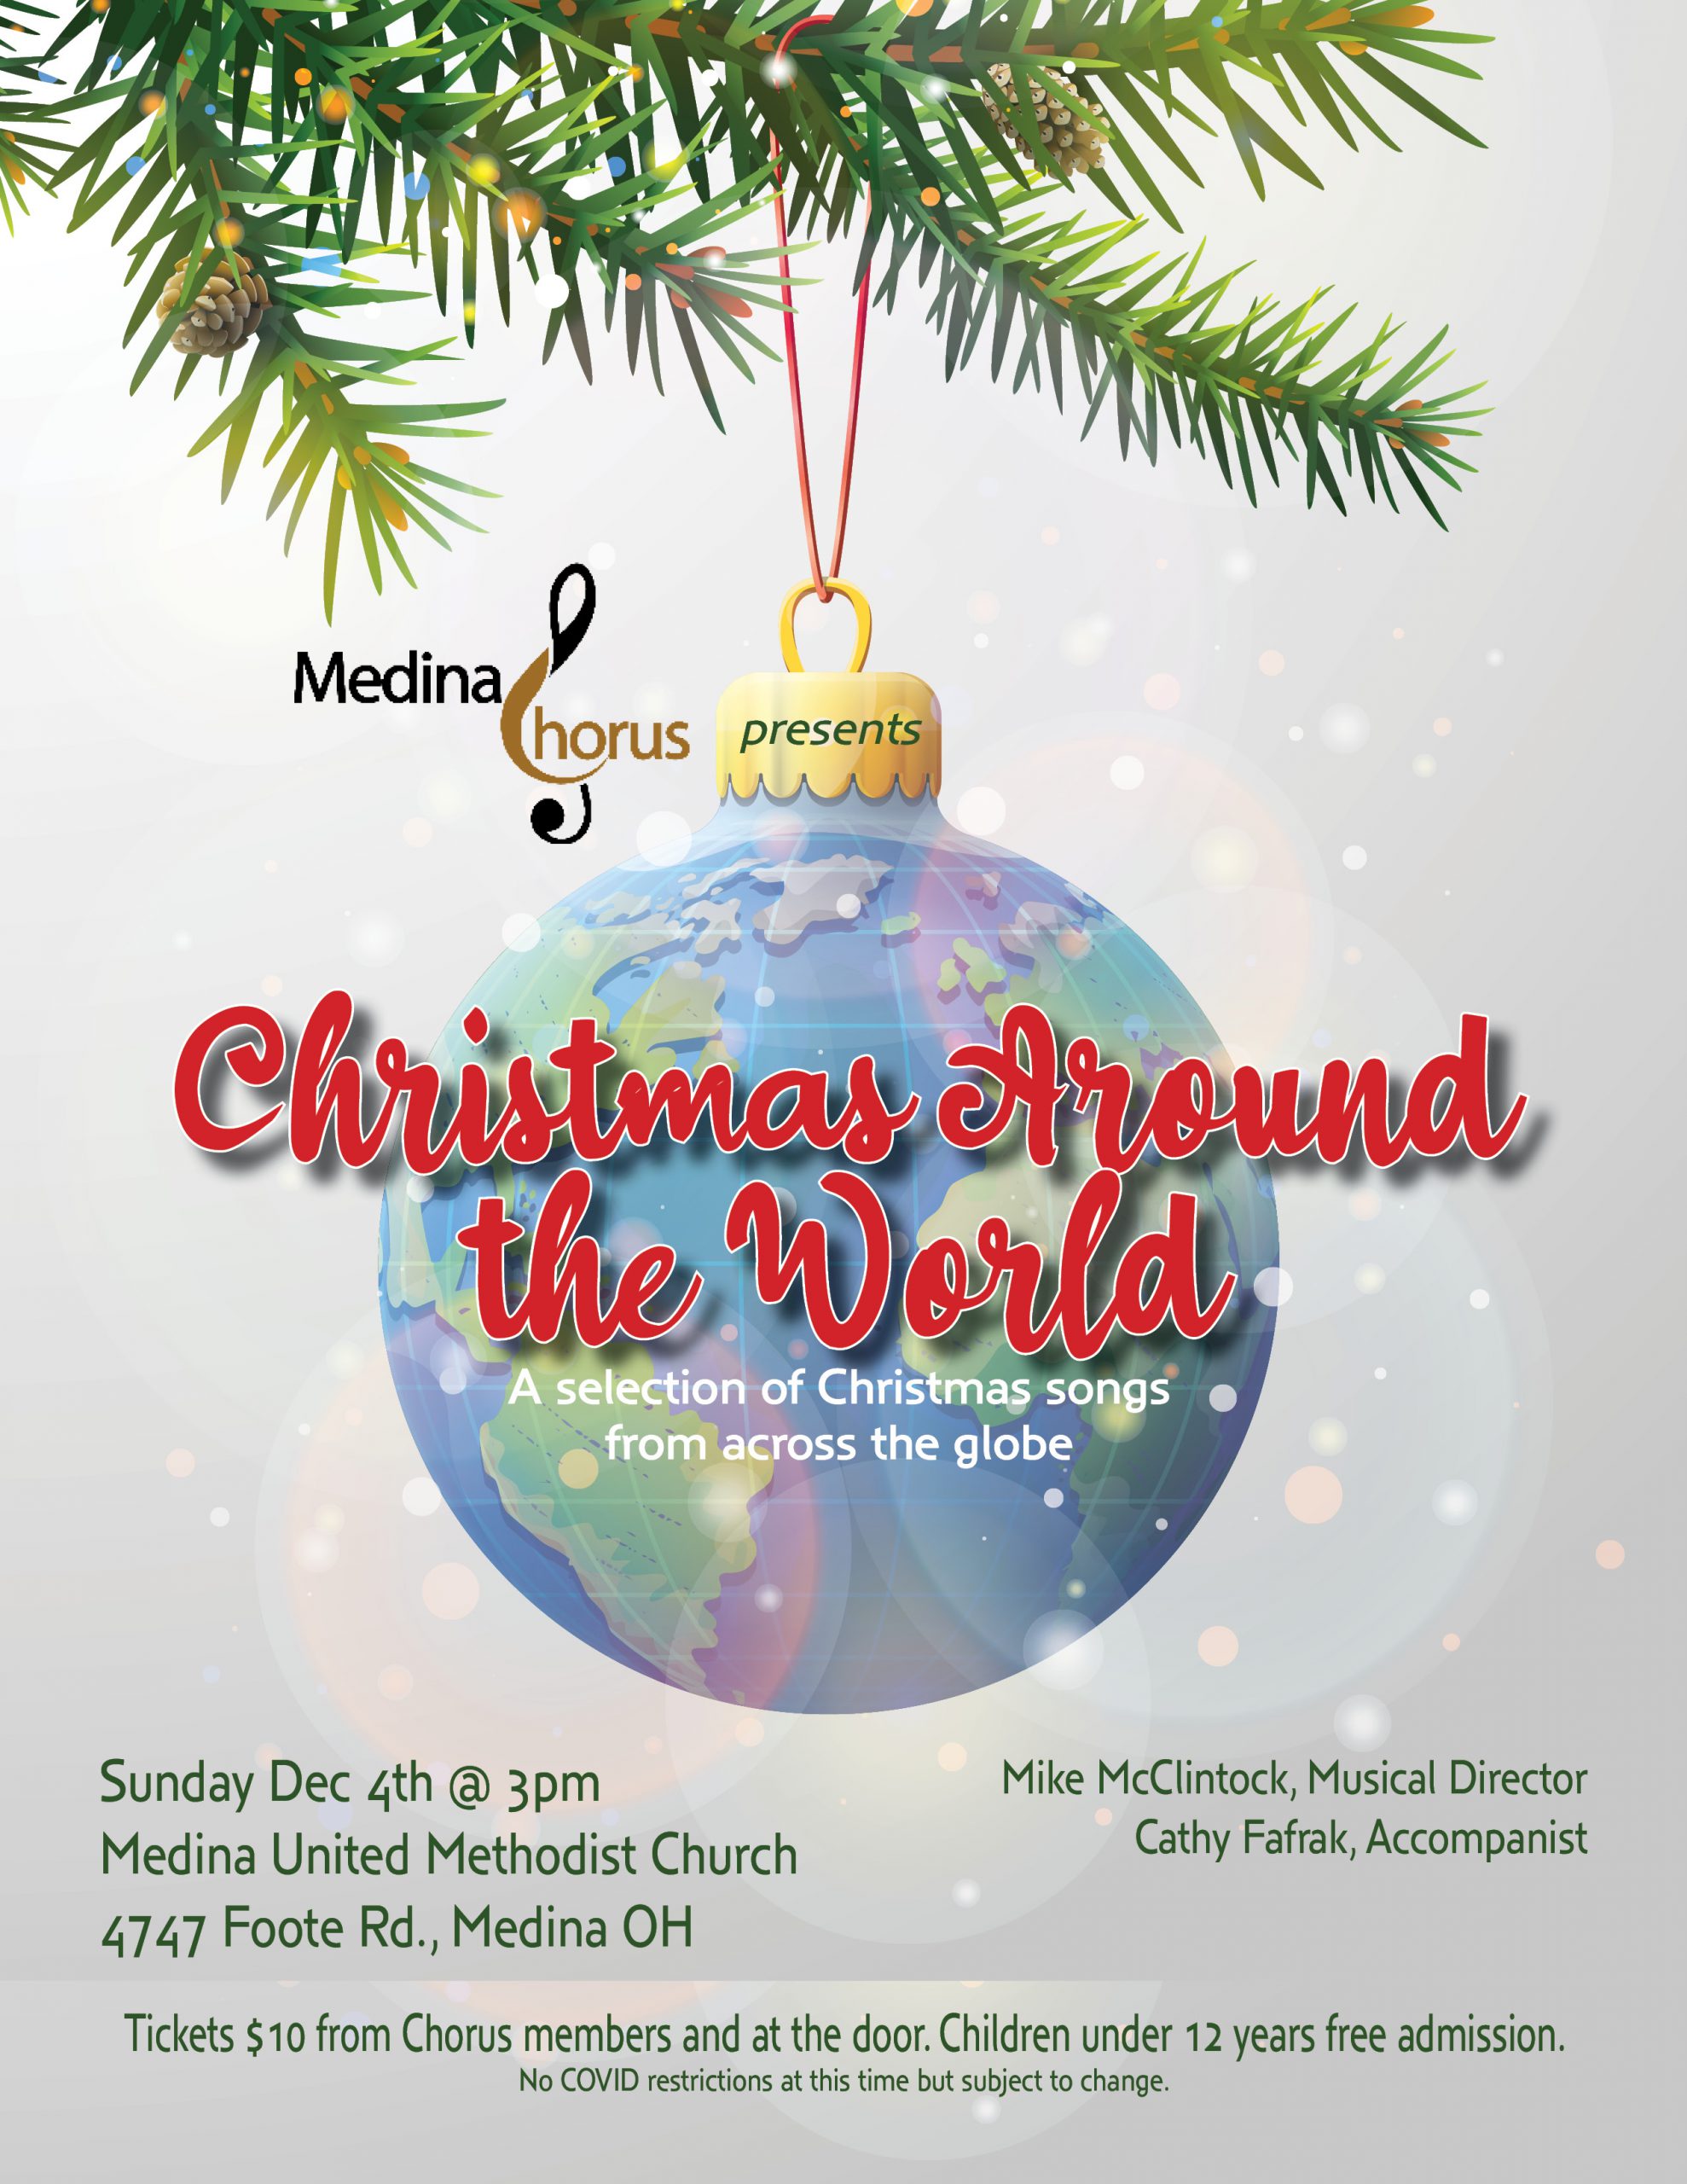 Join us as we sing in the season! Sunday Dec 4th at 3pm